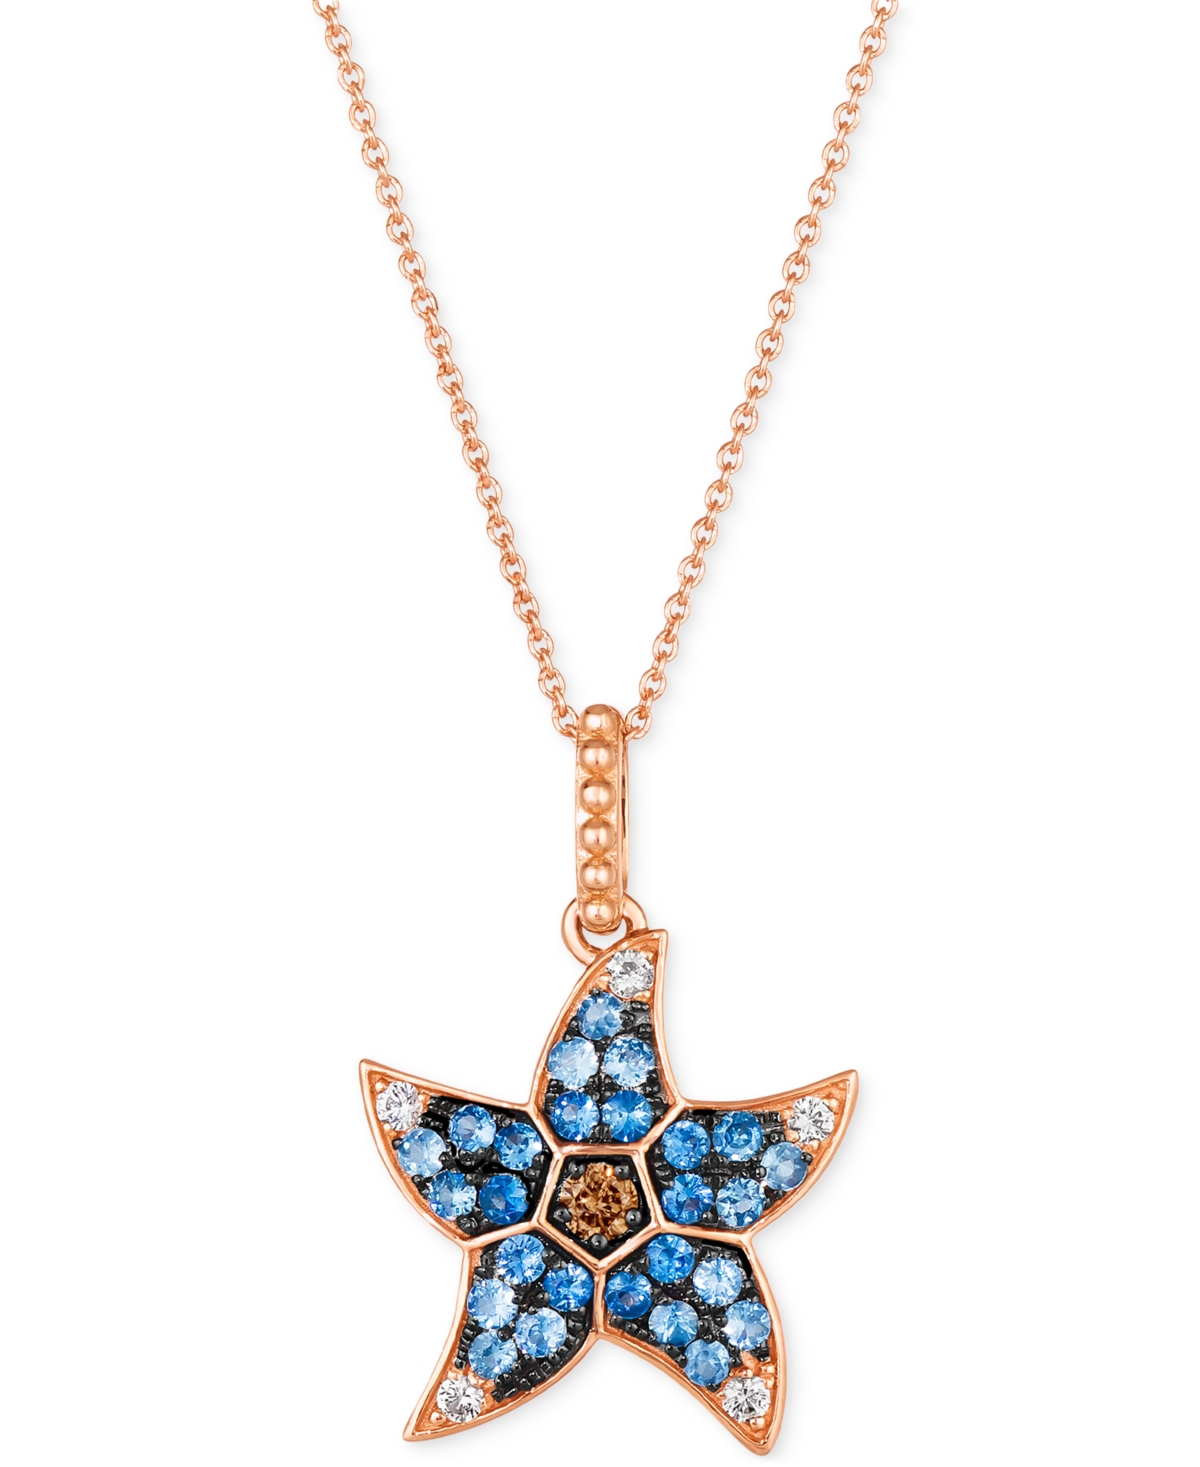 Multi-Sapphire (5/8 ct. t.w.) & Chocolate Diamond (1/20 ct. t.w.) Starfish Pendant Necklace in 14k Rose Gold, 18" + 2" extender